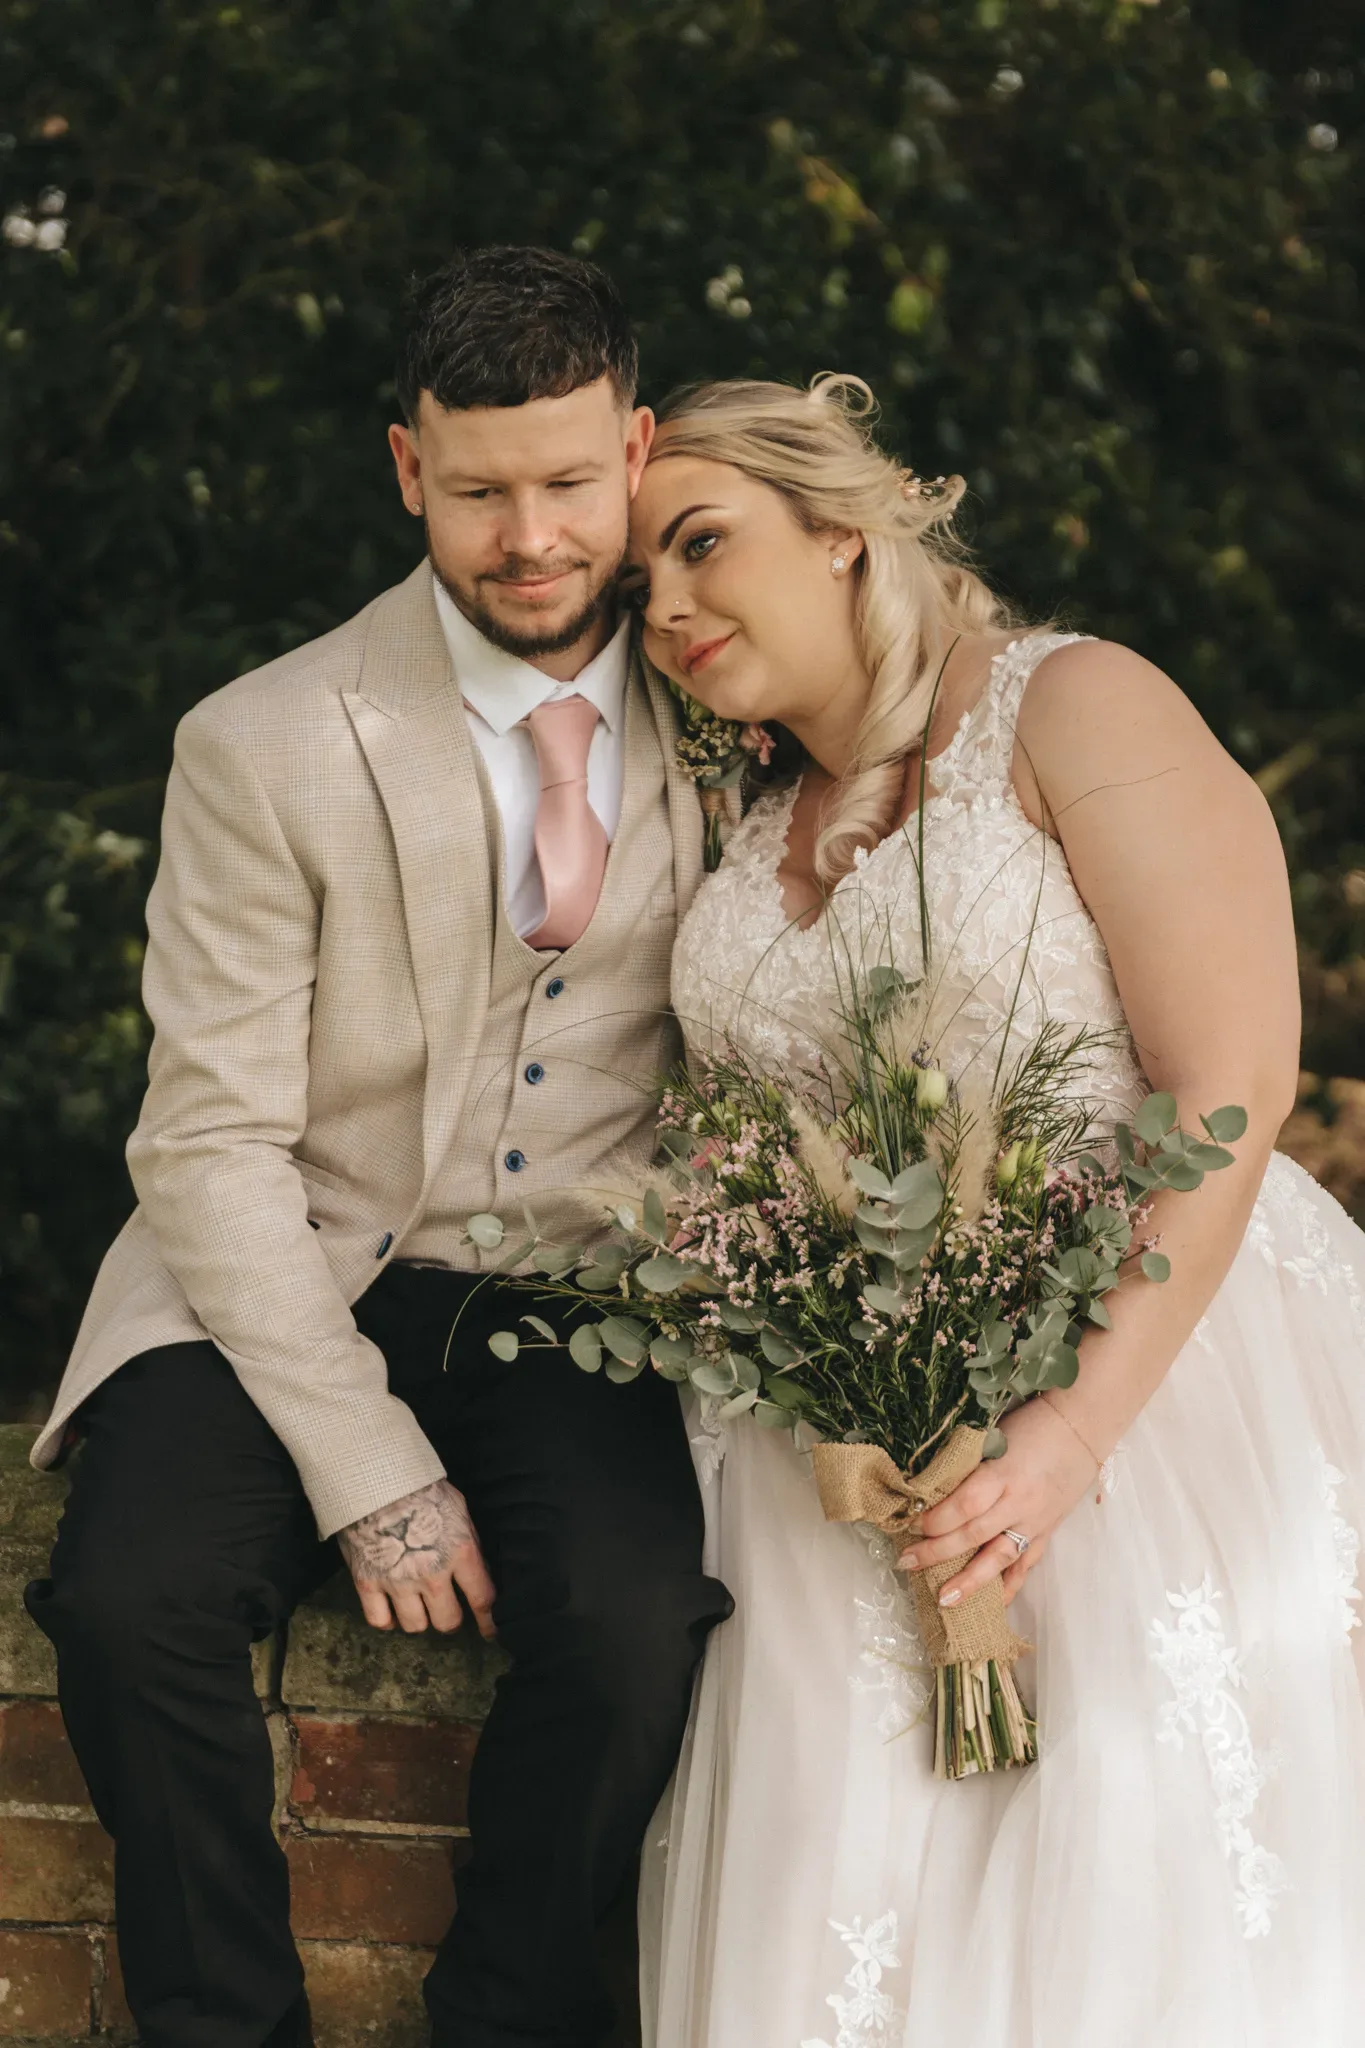 A bride and groom sit closely together, smiling softly, in a garden. the bride, on the right, holds a bouquet with green and purple flowers. both are dressed formally, the groom in a light beige suit with a pink tie, and the bride in a white lace gown.